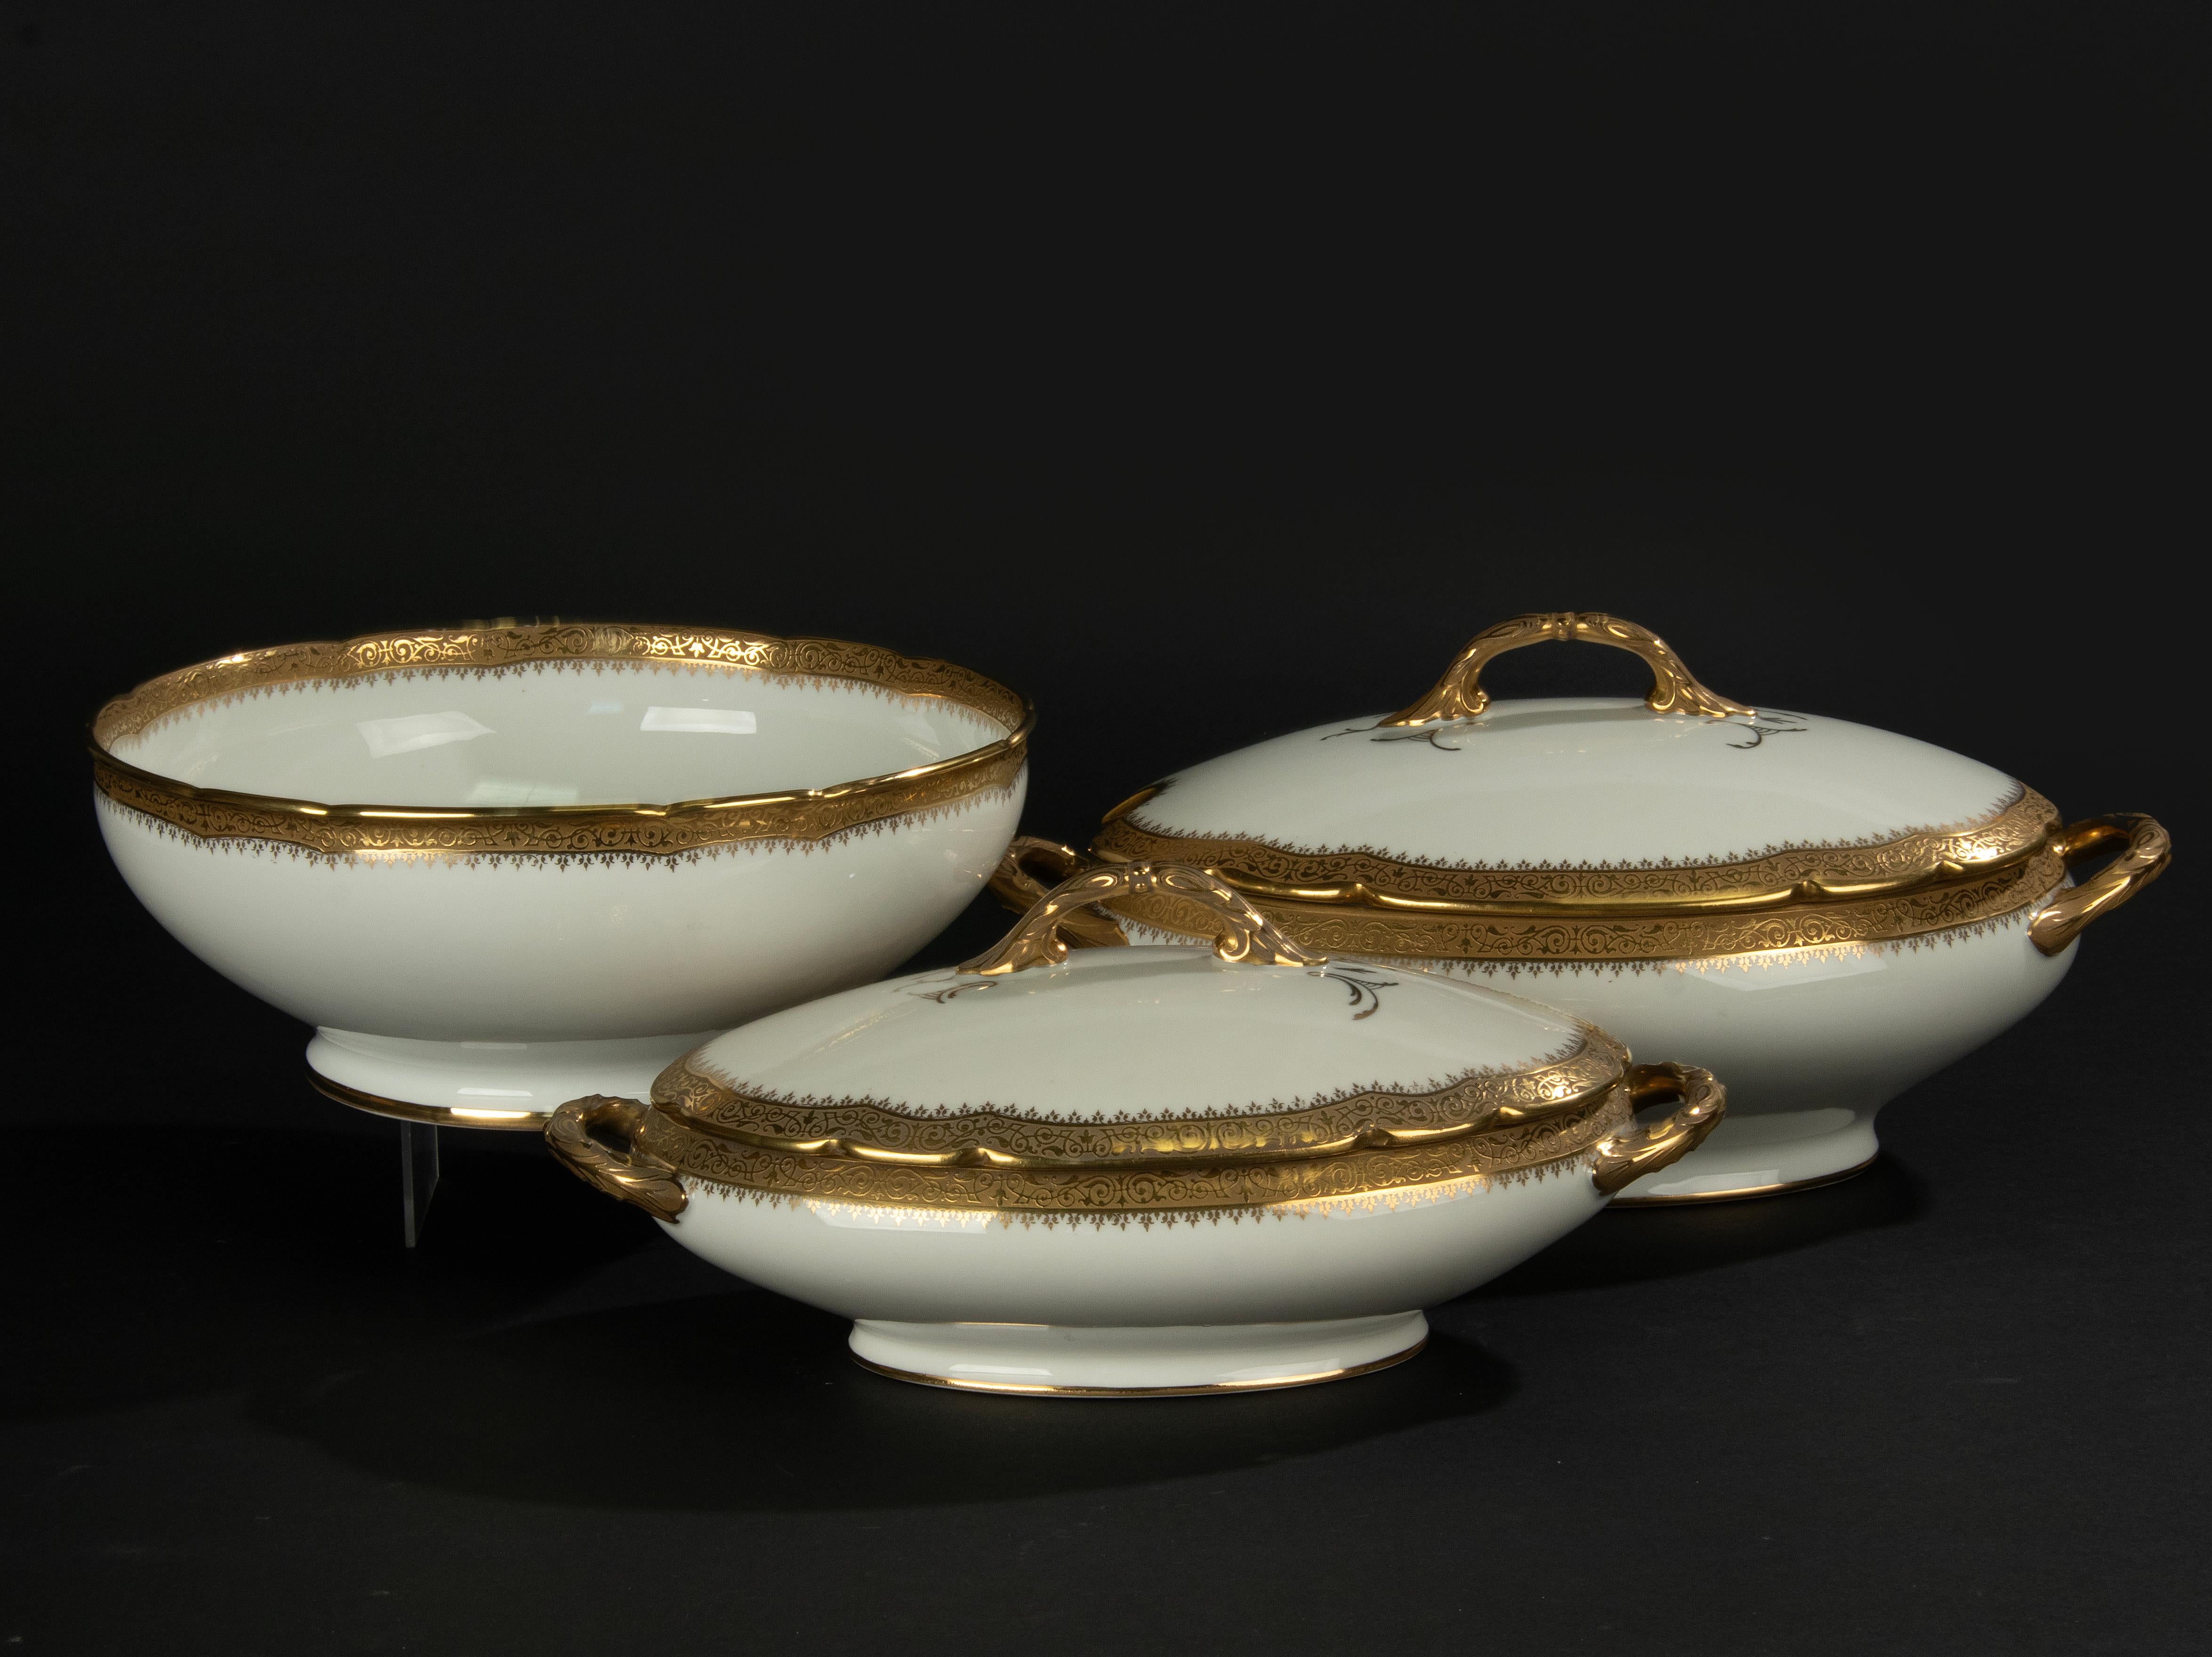 51-Piece Set Porcelain Tableware for 12 Persons - Limoges Incrusted Gold Trims 2